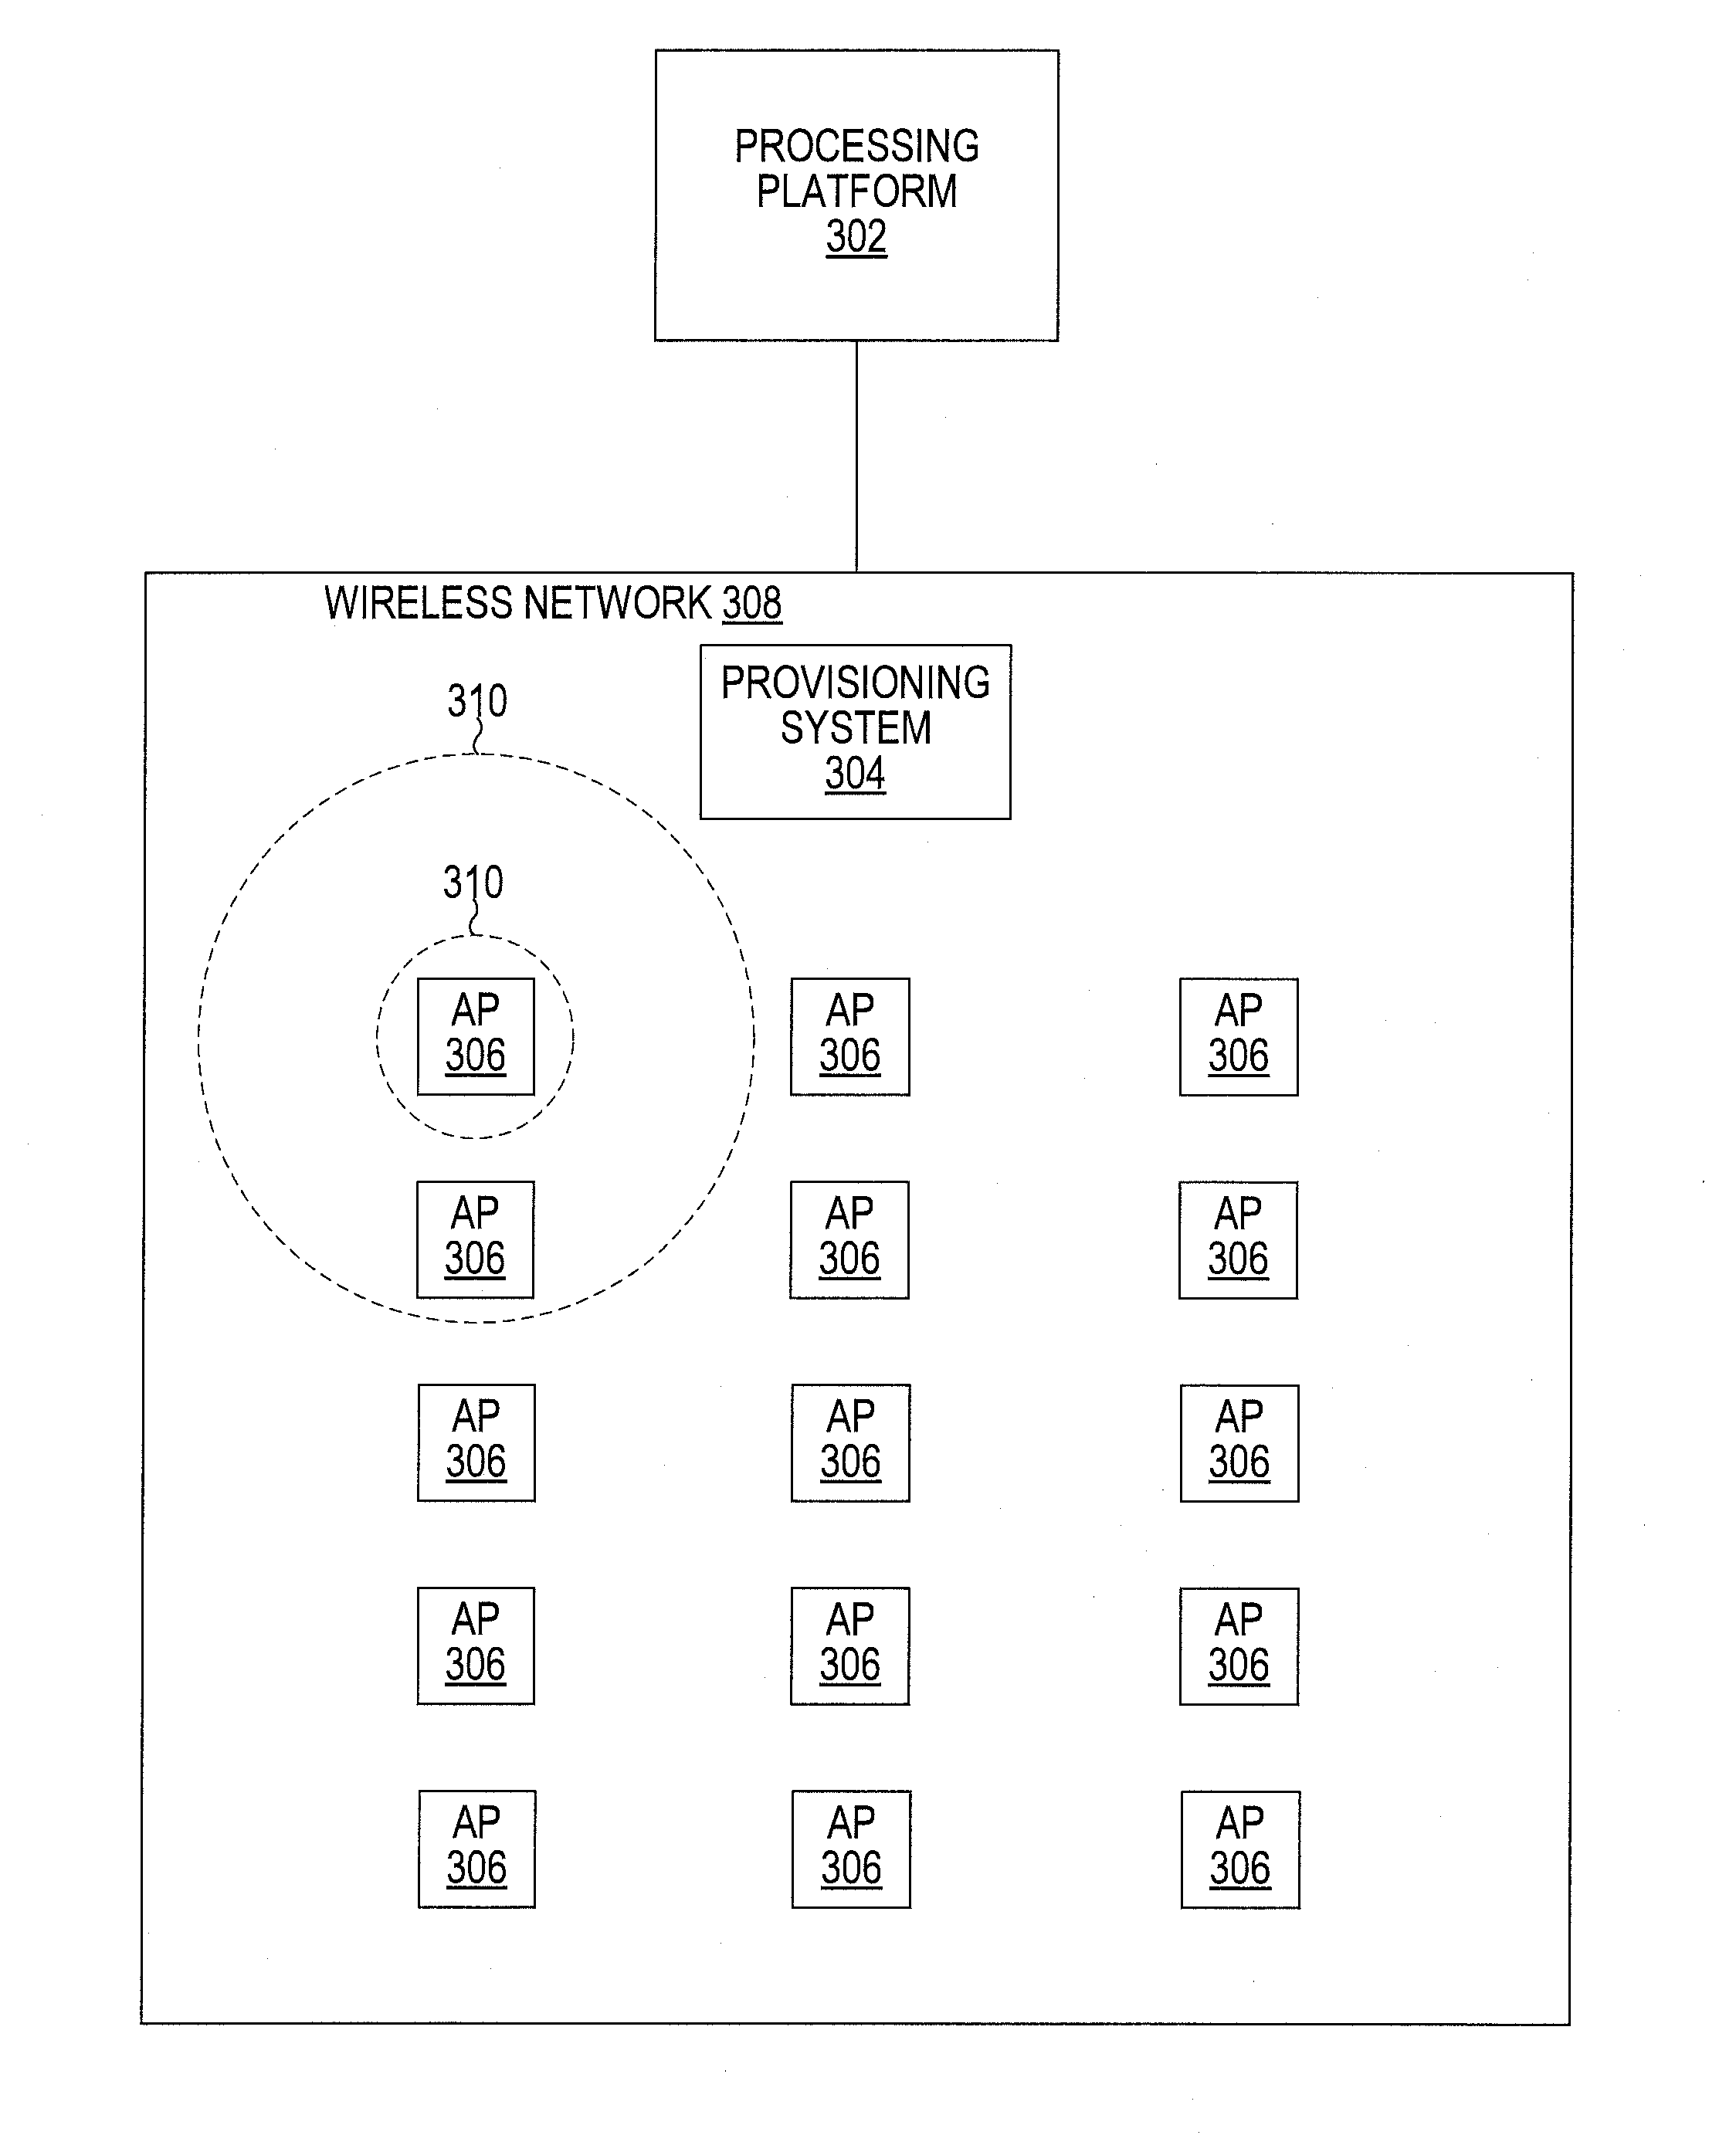 Method for provisioning a wireless network